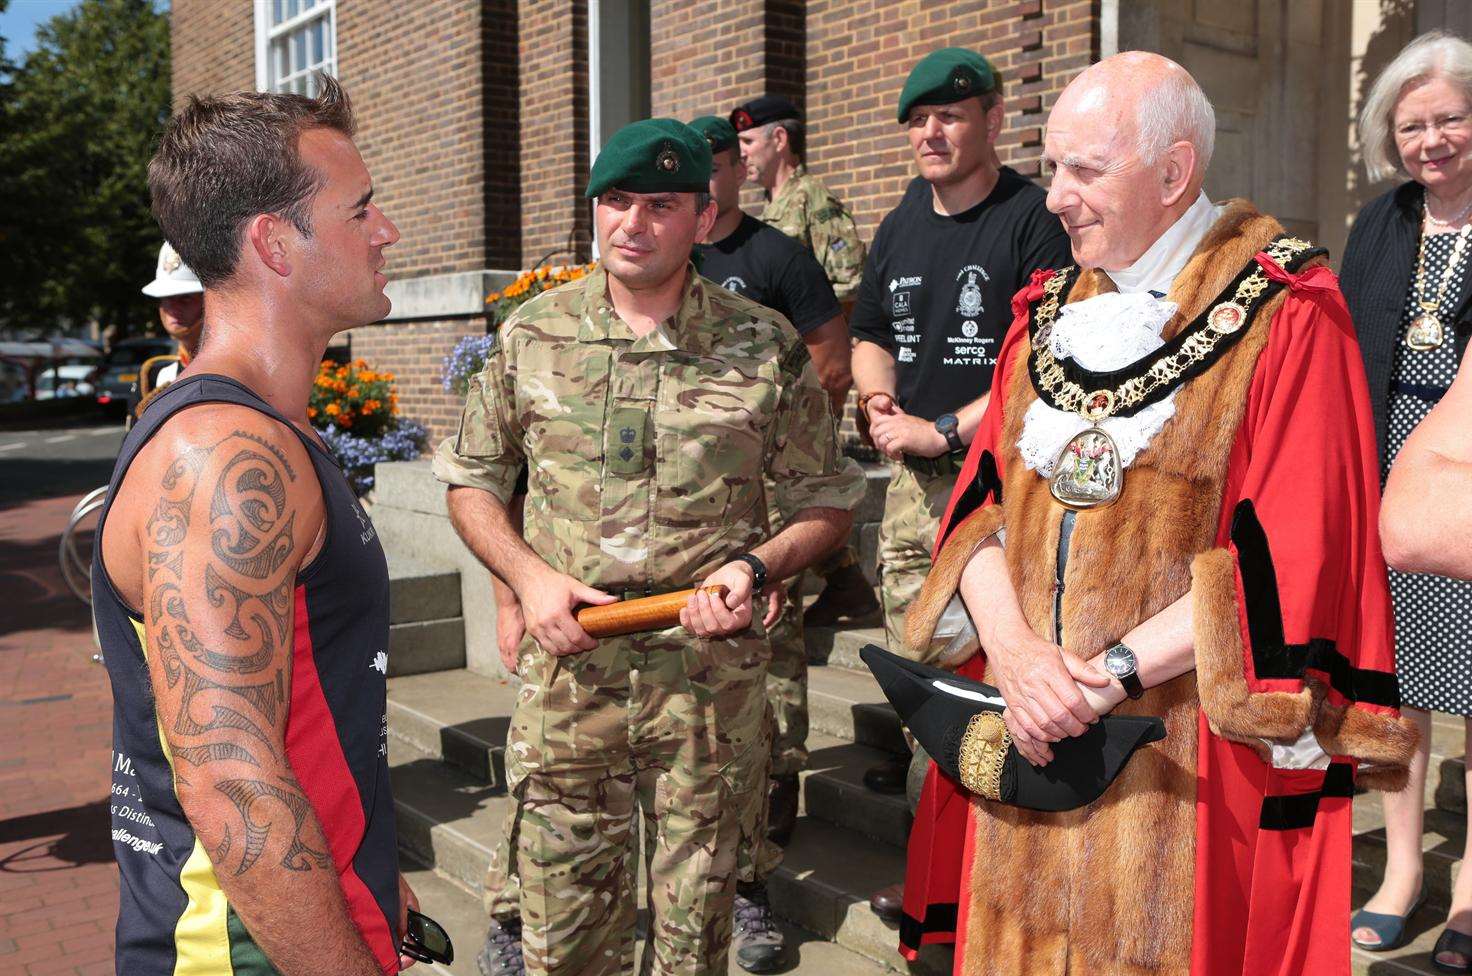 CSgt Richard Hayden, of 40 Commando, Col Neil Watkinson, Mayor Cllr Julian Stanyer on the steps of the town hall during the baton handover as part of the 1664 Challenge